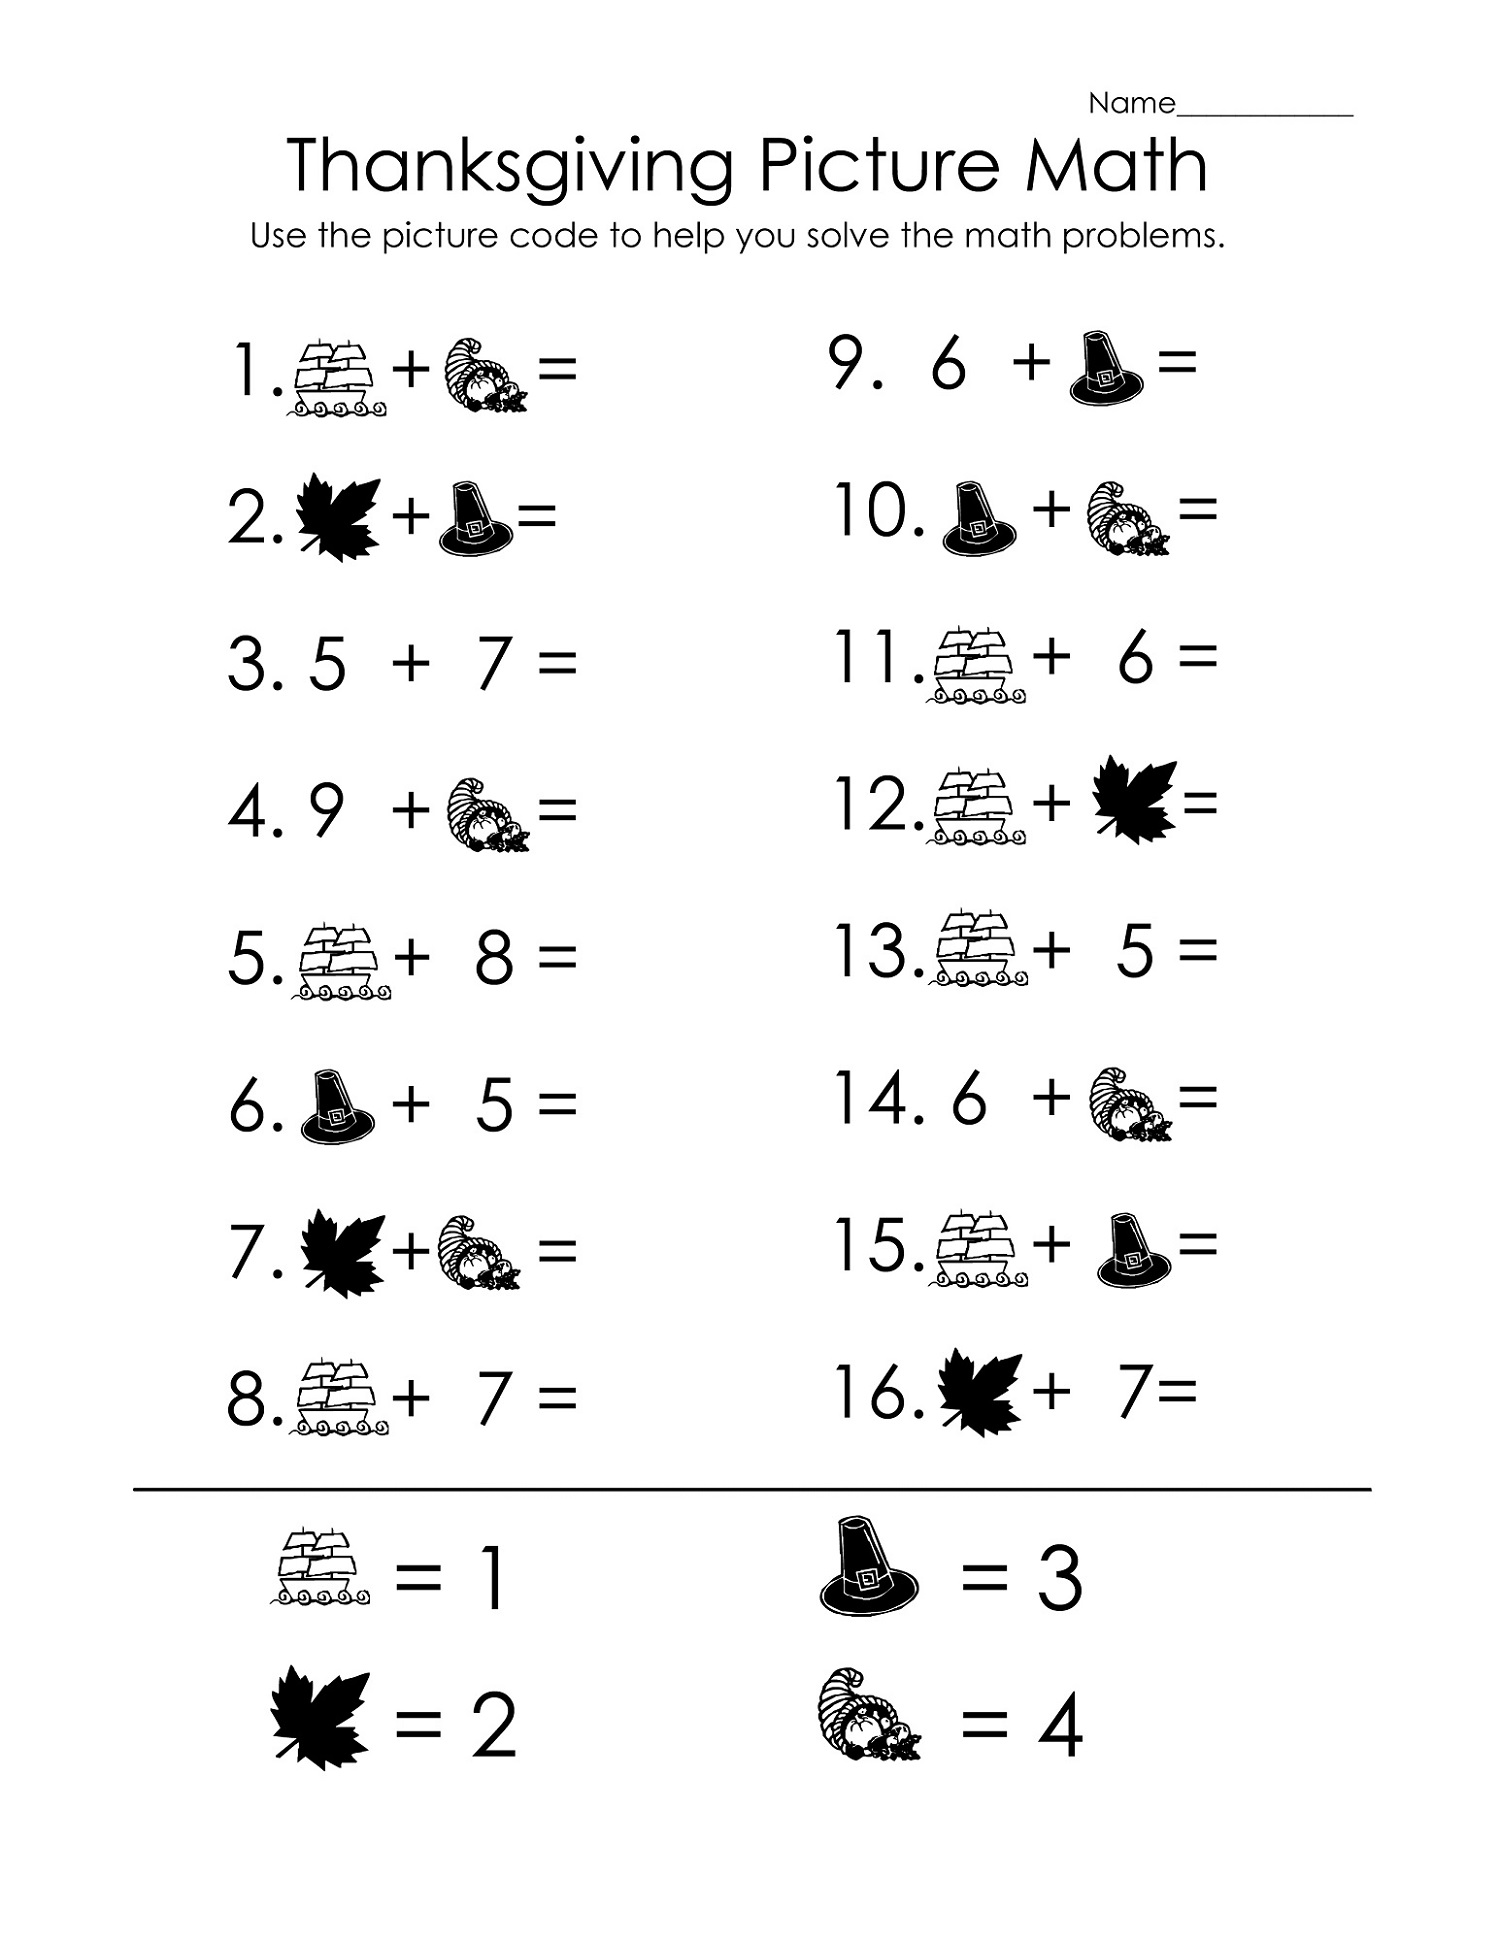 Thanksgiving Picture Math Worksheets